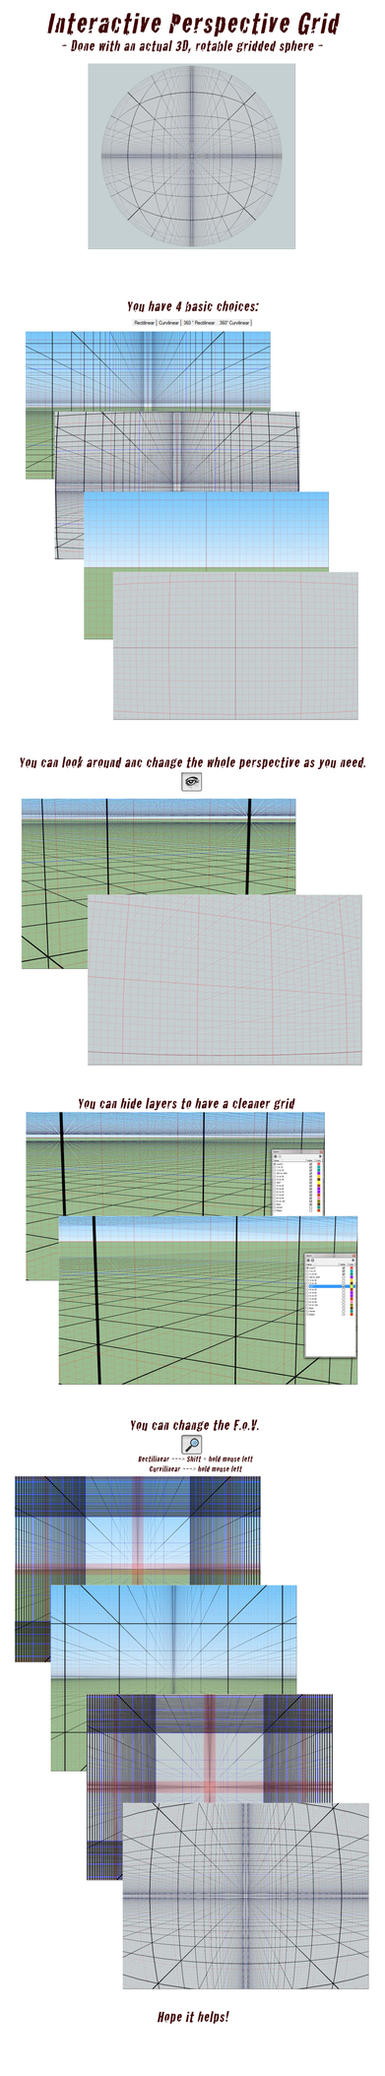 This is a 3D interactive perspective grid, done in Sketchup